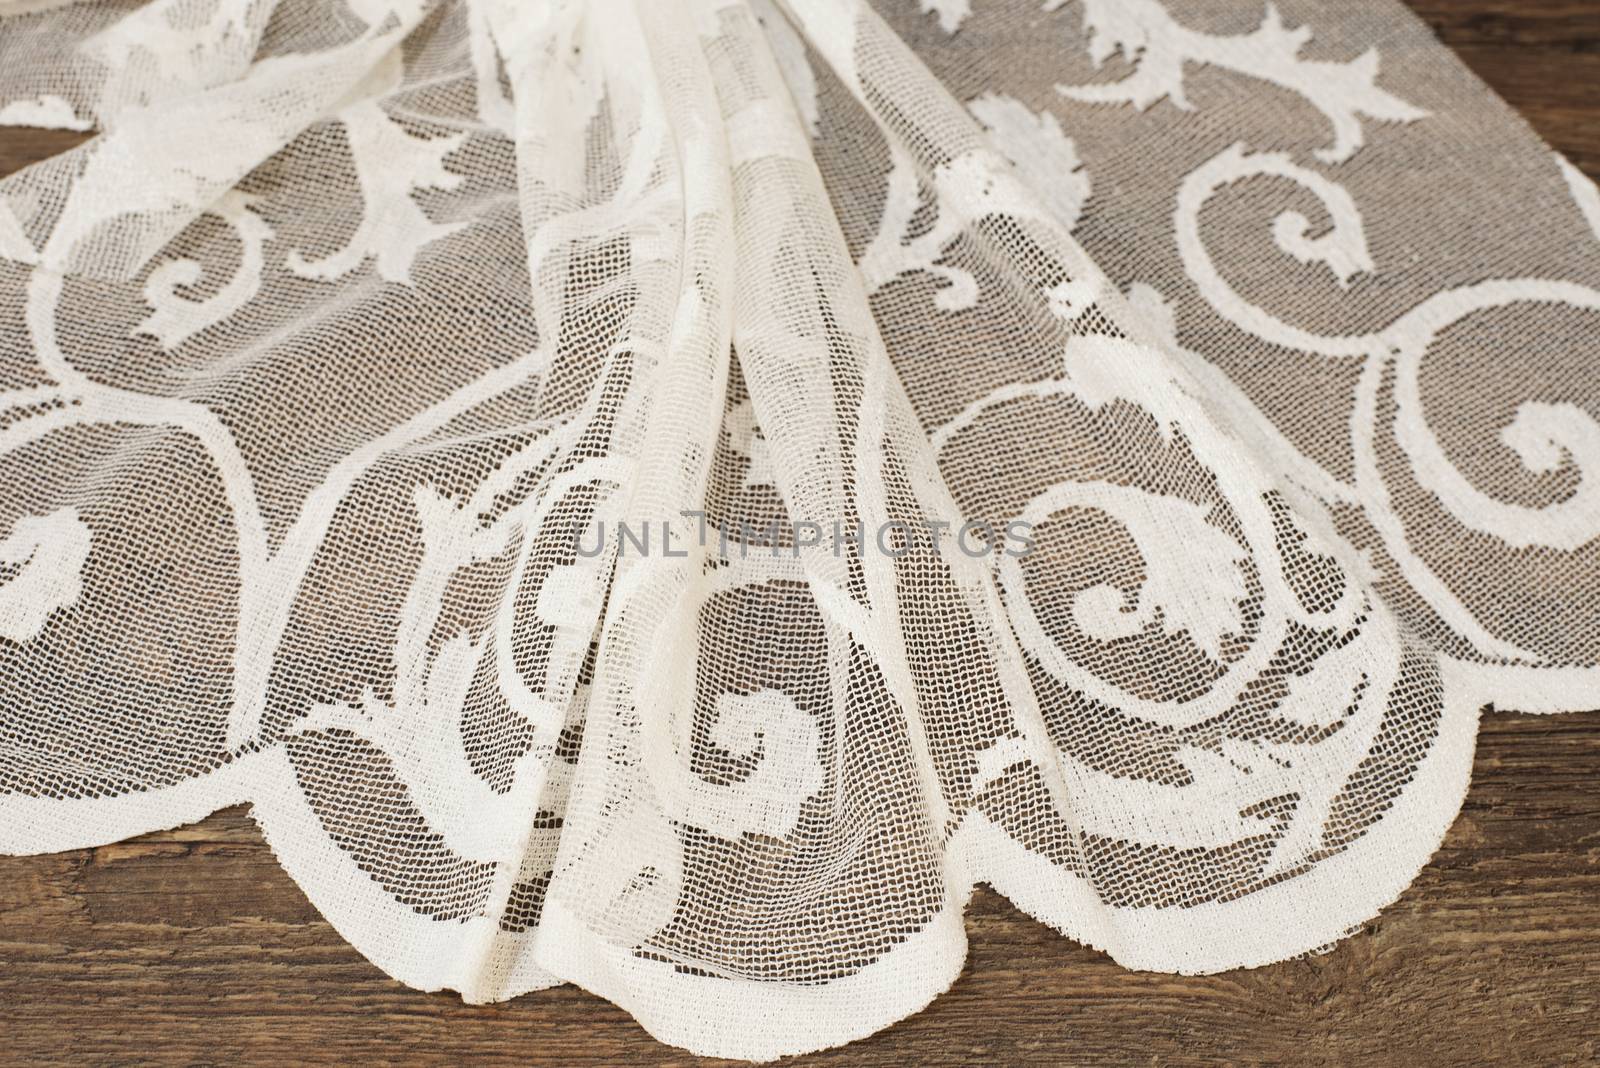 Close up of Beautiful White Tulle. Sheer Curtains Fabric Sample. Texture, Background, Pattern. Wedding Concept. Interior Design. Vintage Lace Tulle Chiffon